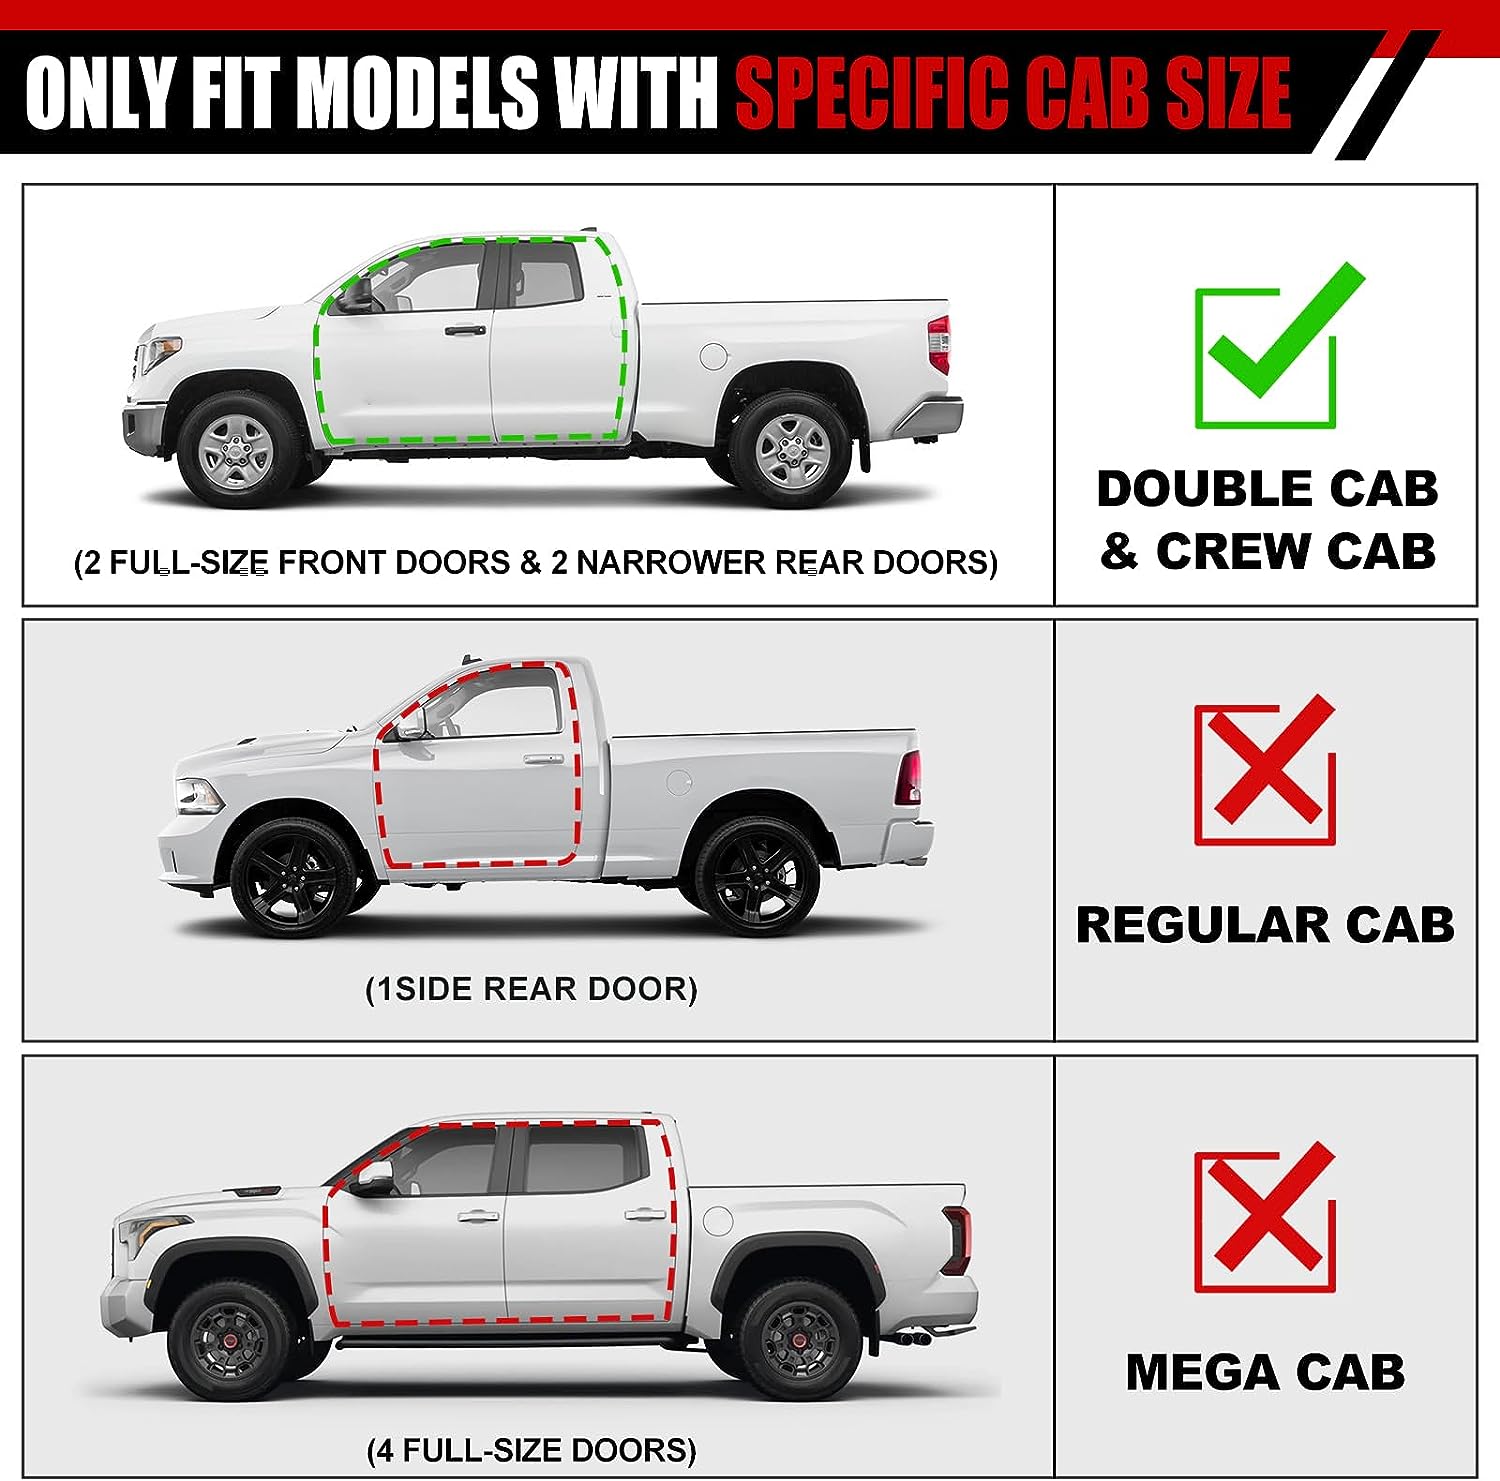 Running Boards Compatible with 2002-2008 Dodge Ram 1500, 2003-2009 Ram 2500 3500 Crew Cab/Quad Cab with 3/4 Size Rear Doors, Stainless Steel Side Steps H6 Style. - COMNOVA AUTOPART